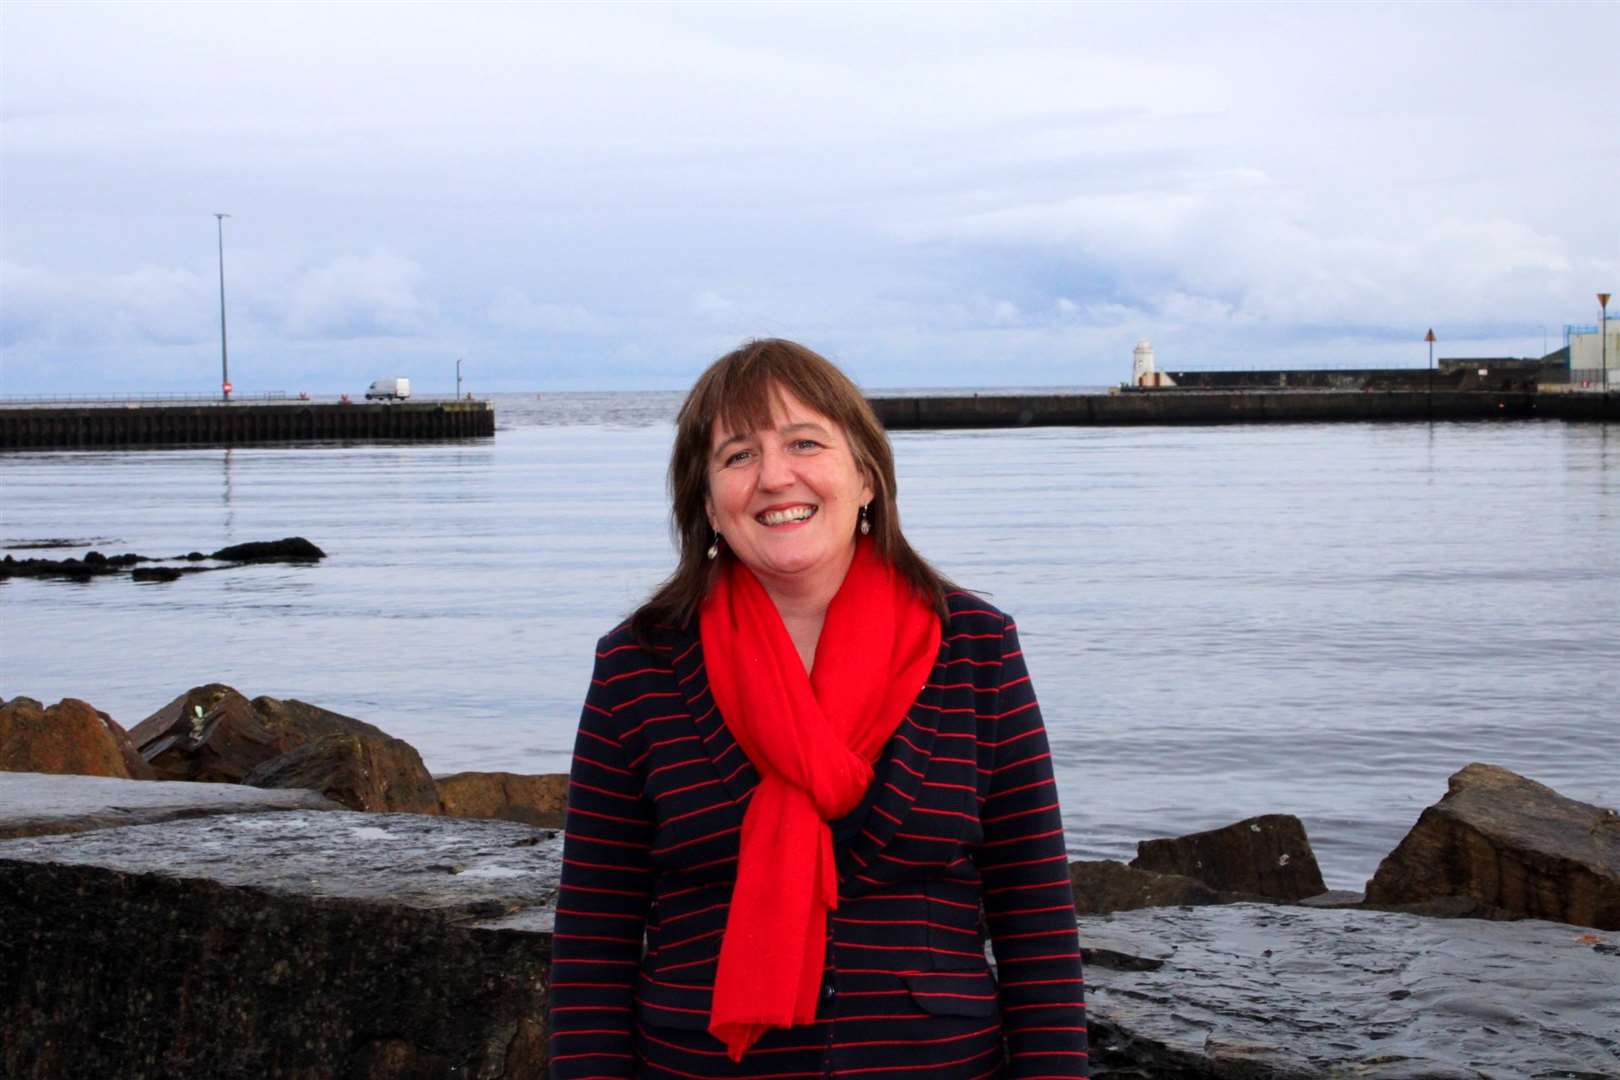 Maree Todd argued that 'we cannot trust the Tories to protect future generations in Scotland'.